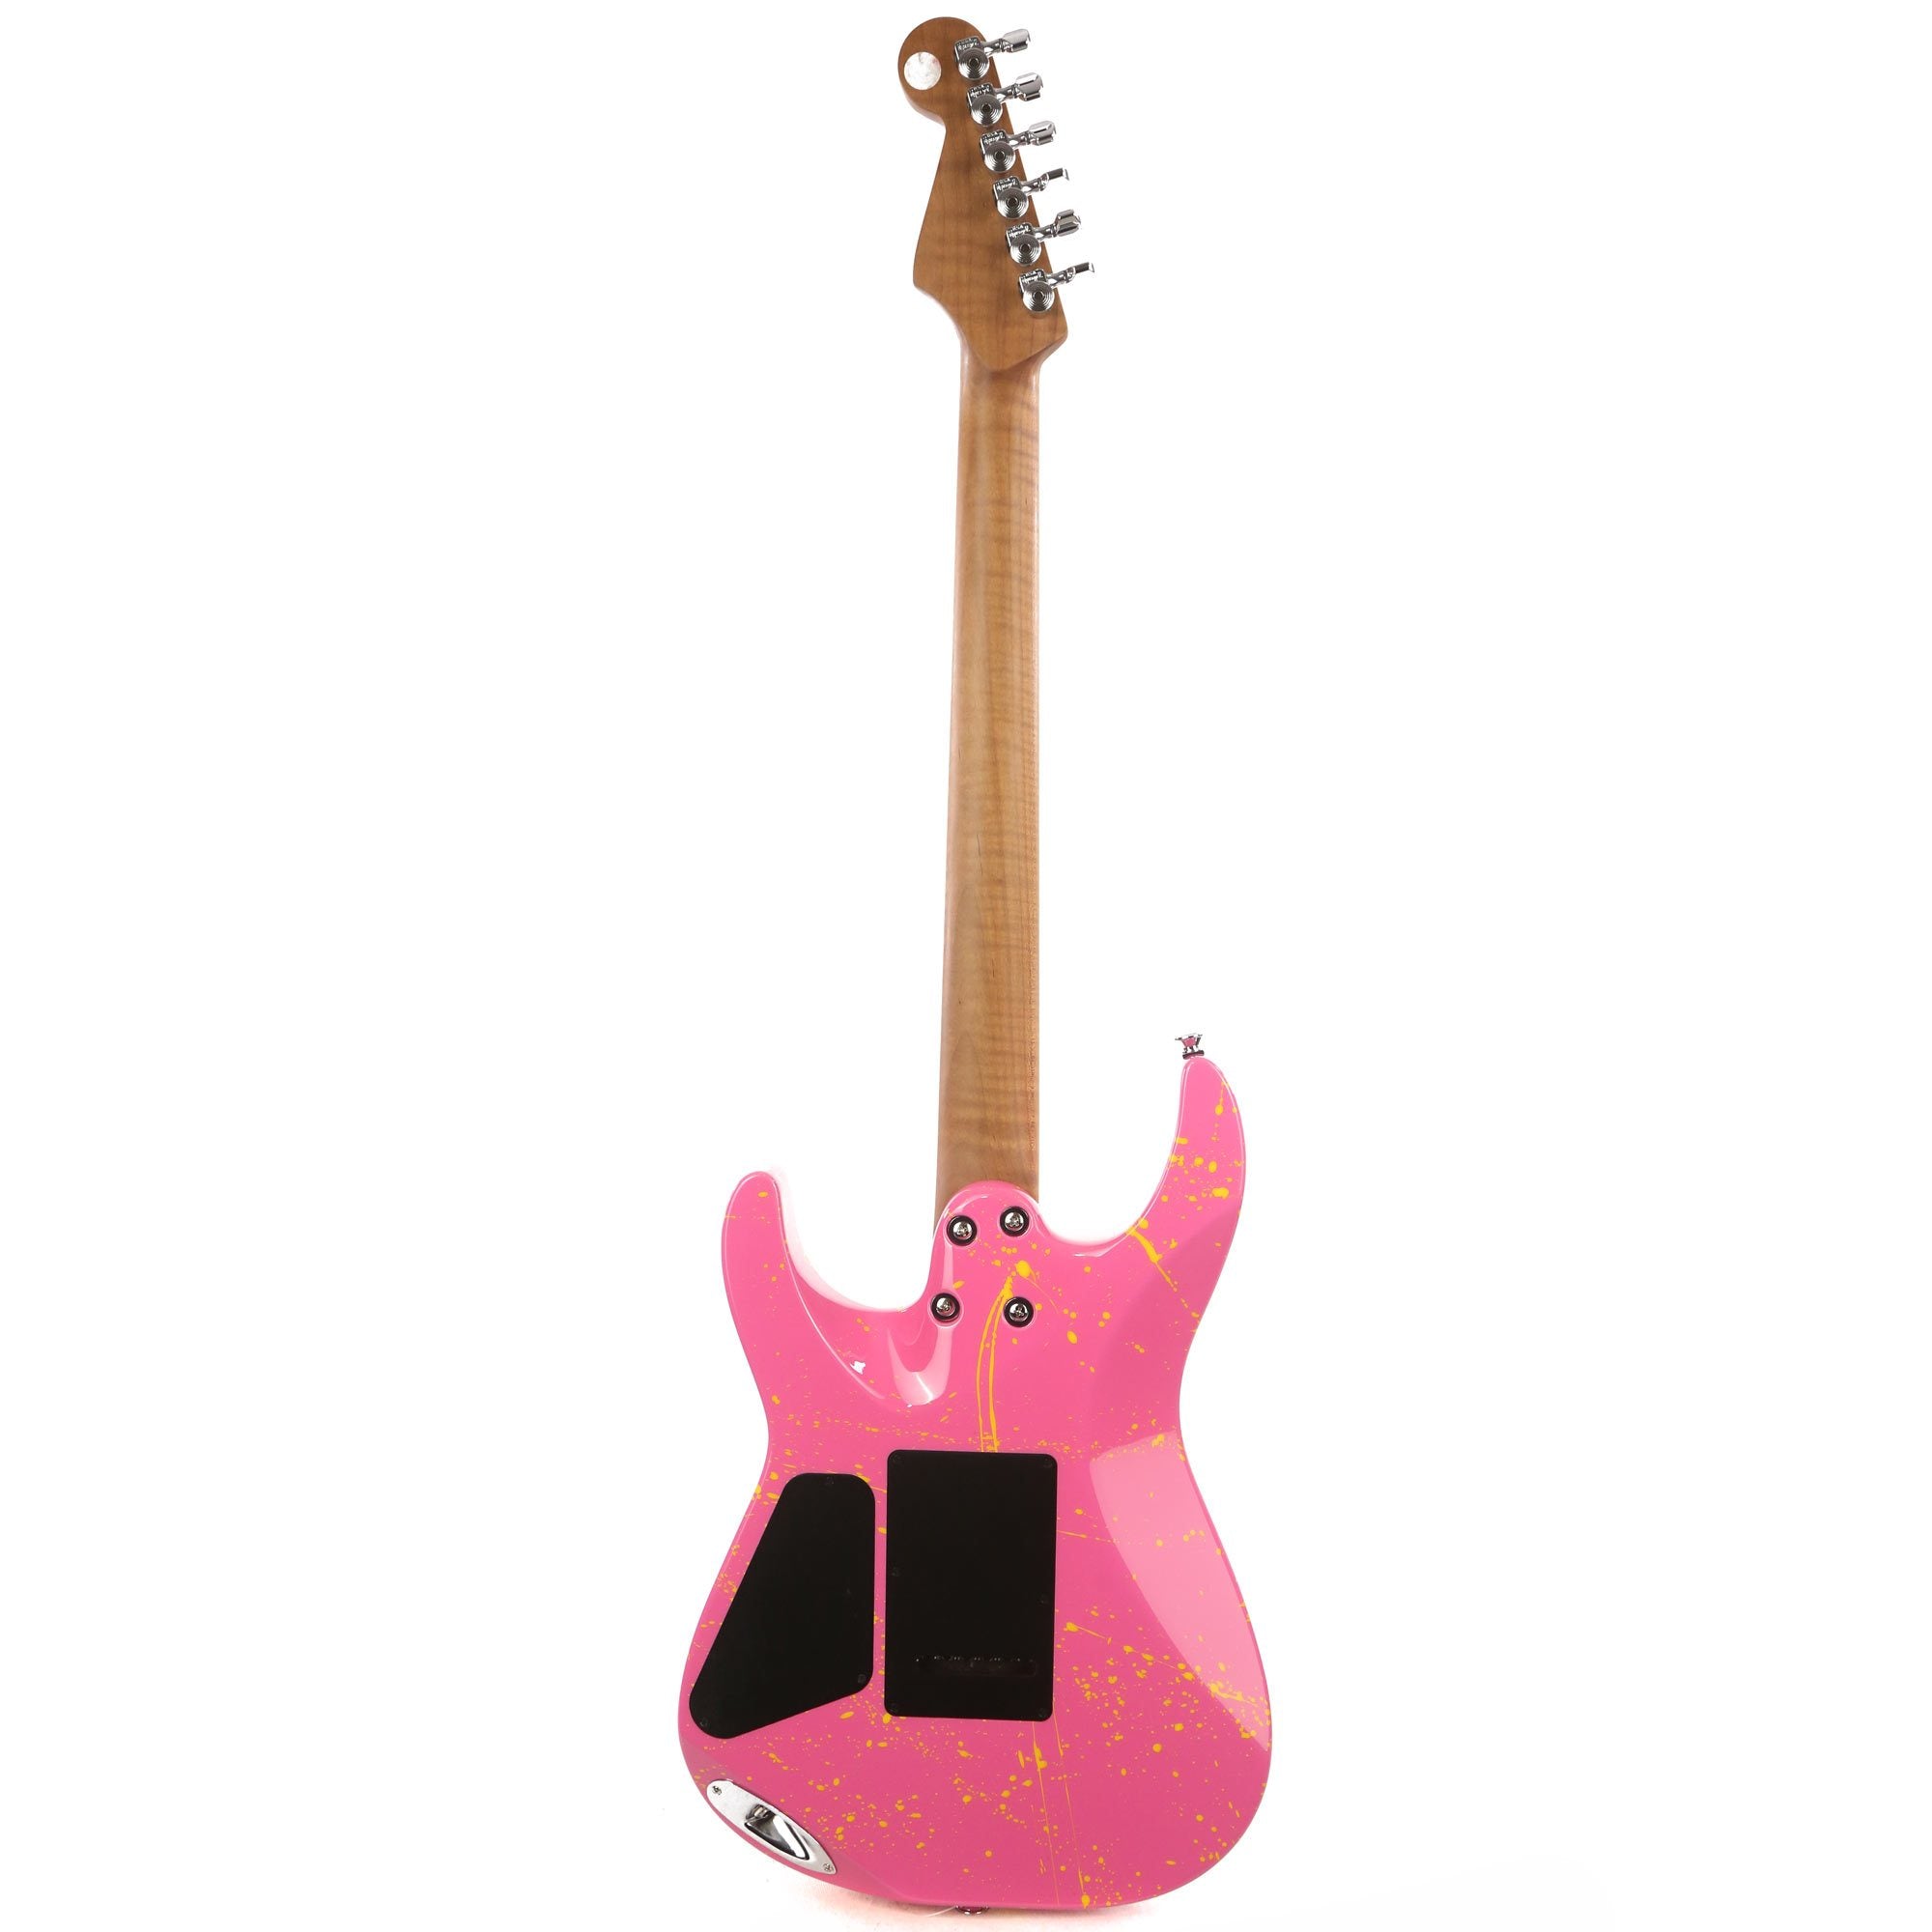 Charvel Yellow Dinky Custom Re Masterbuilt Pink DK24 and Zoo Music The Shop Splatter |